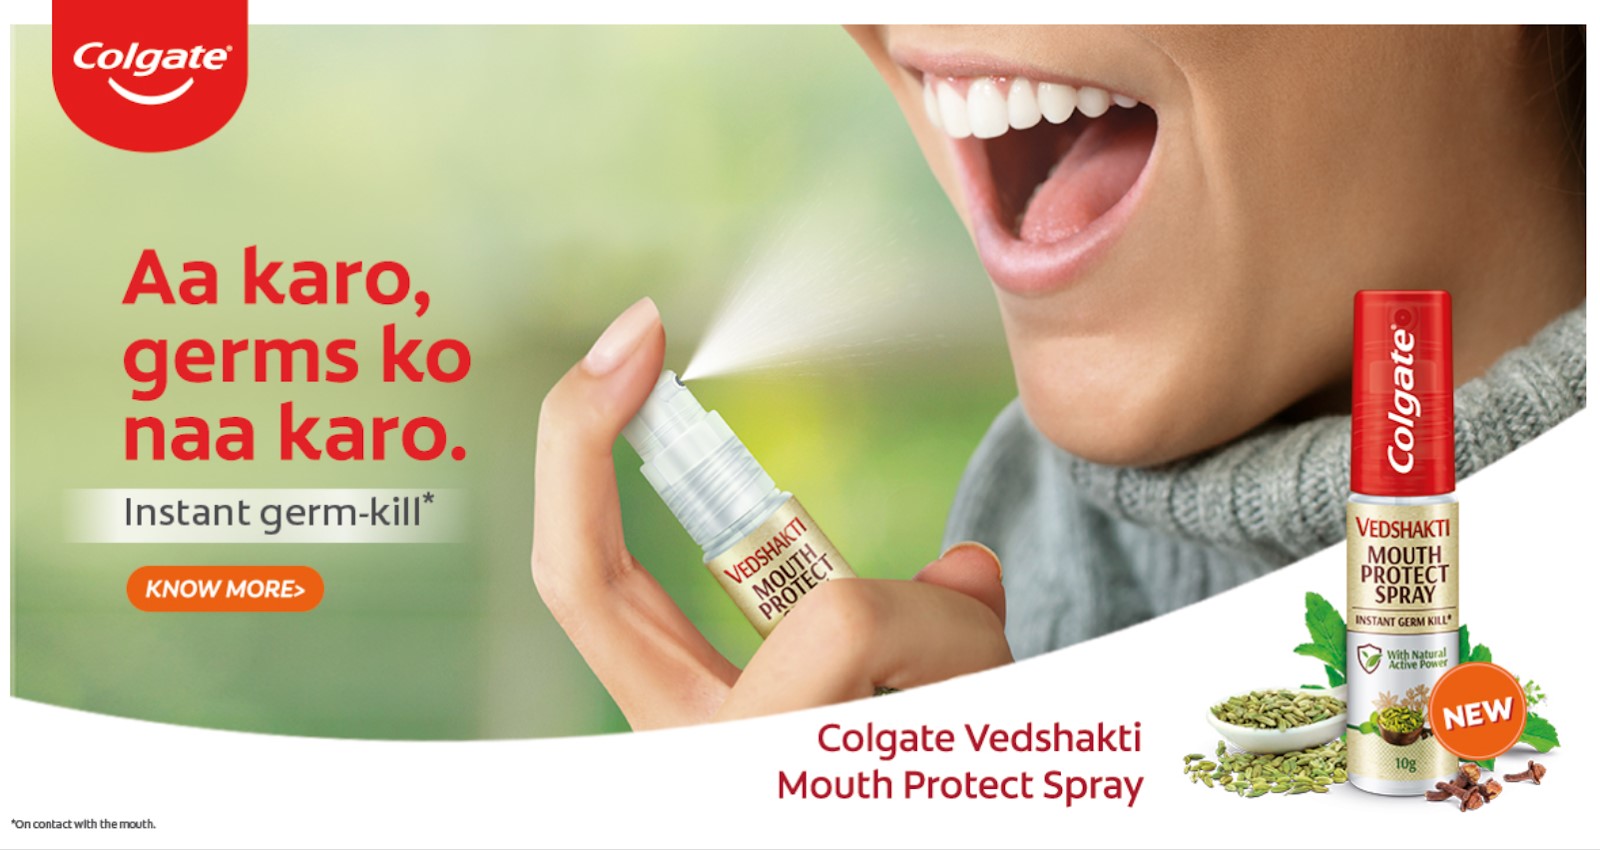 Colgate Vedshakti launches a first of its kind germ-kill Mouth Spray